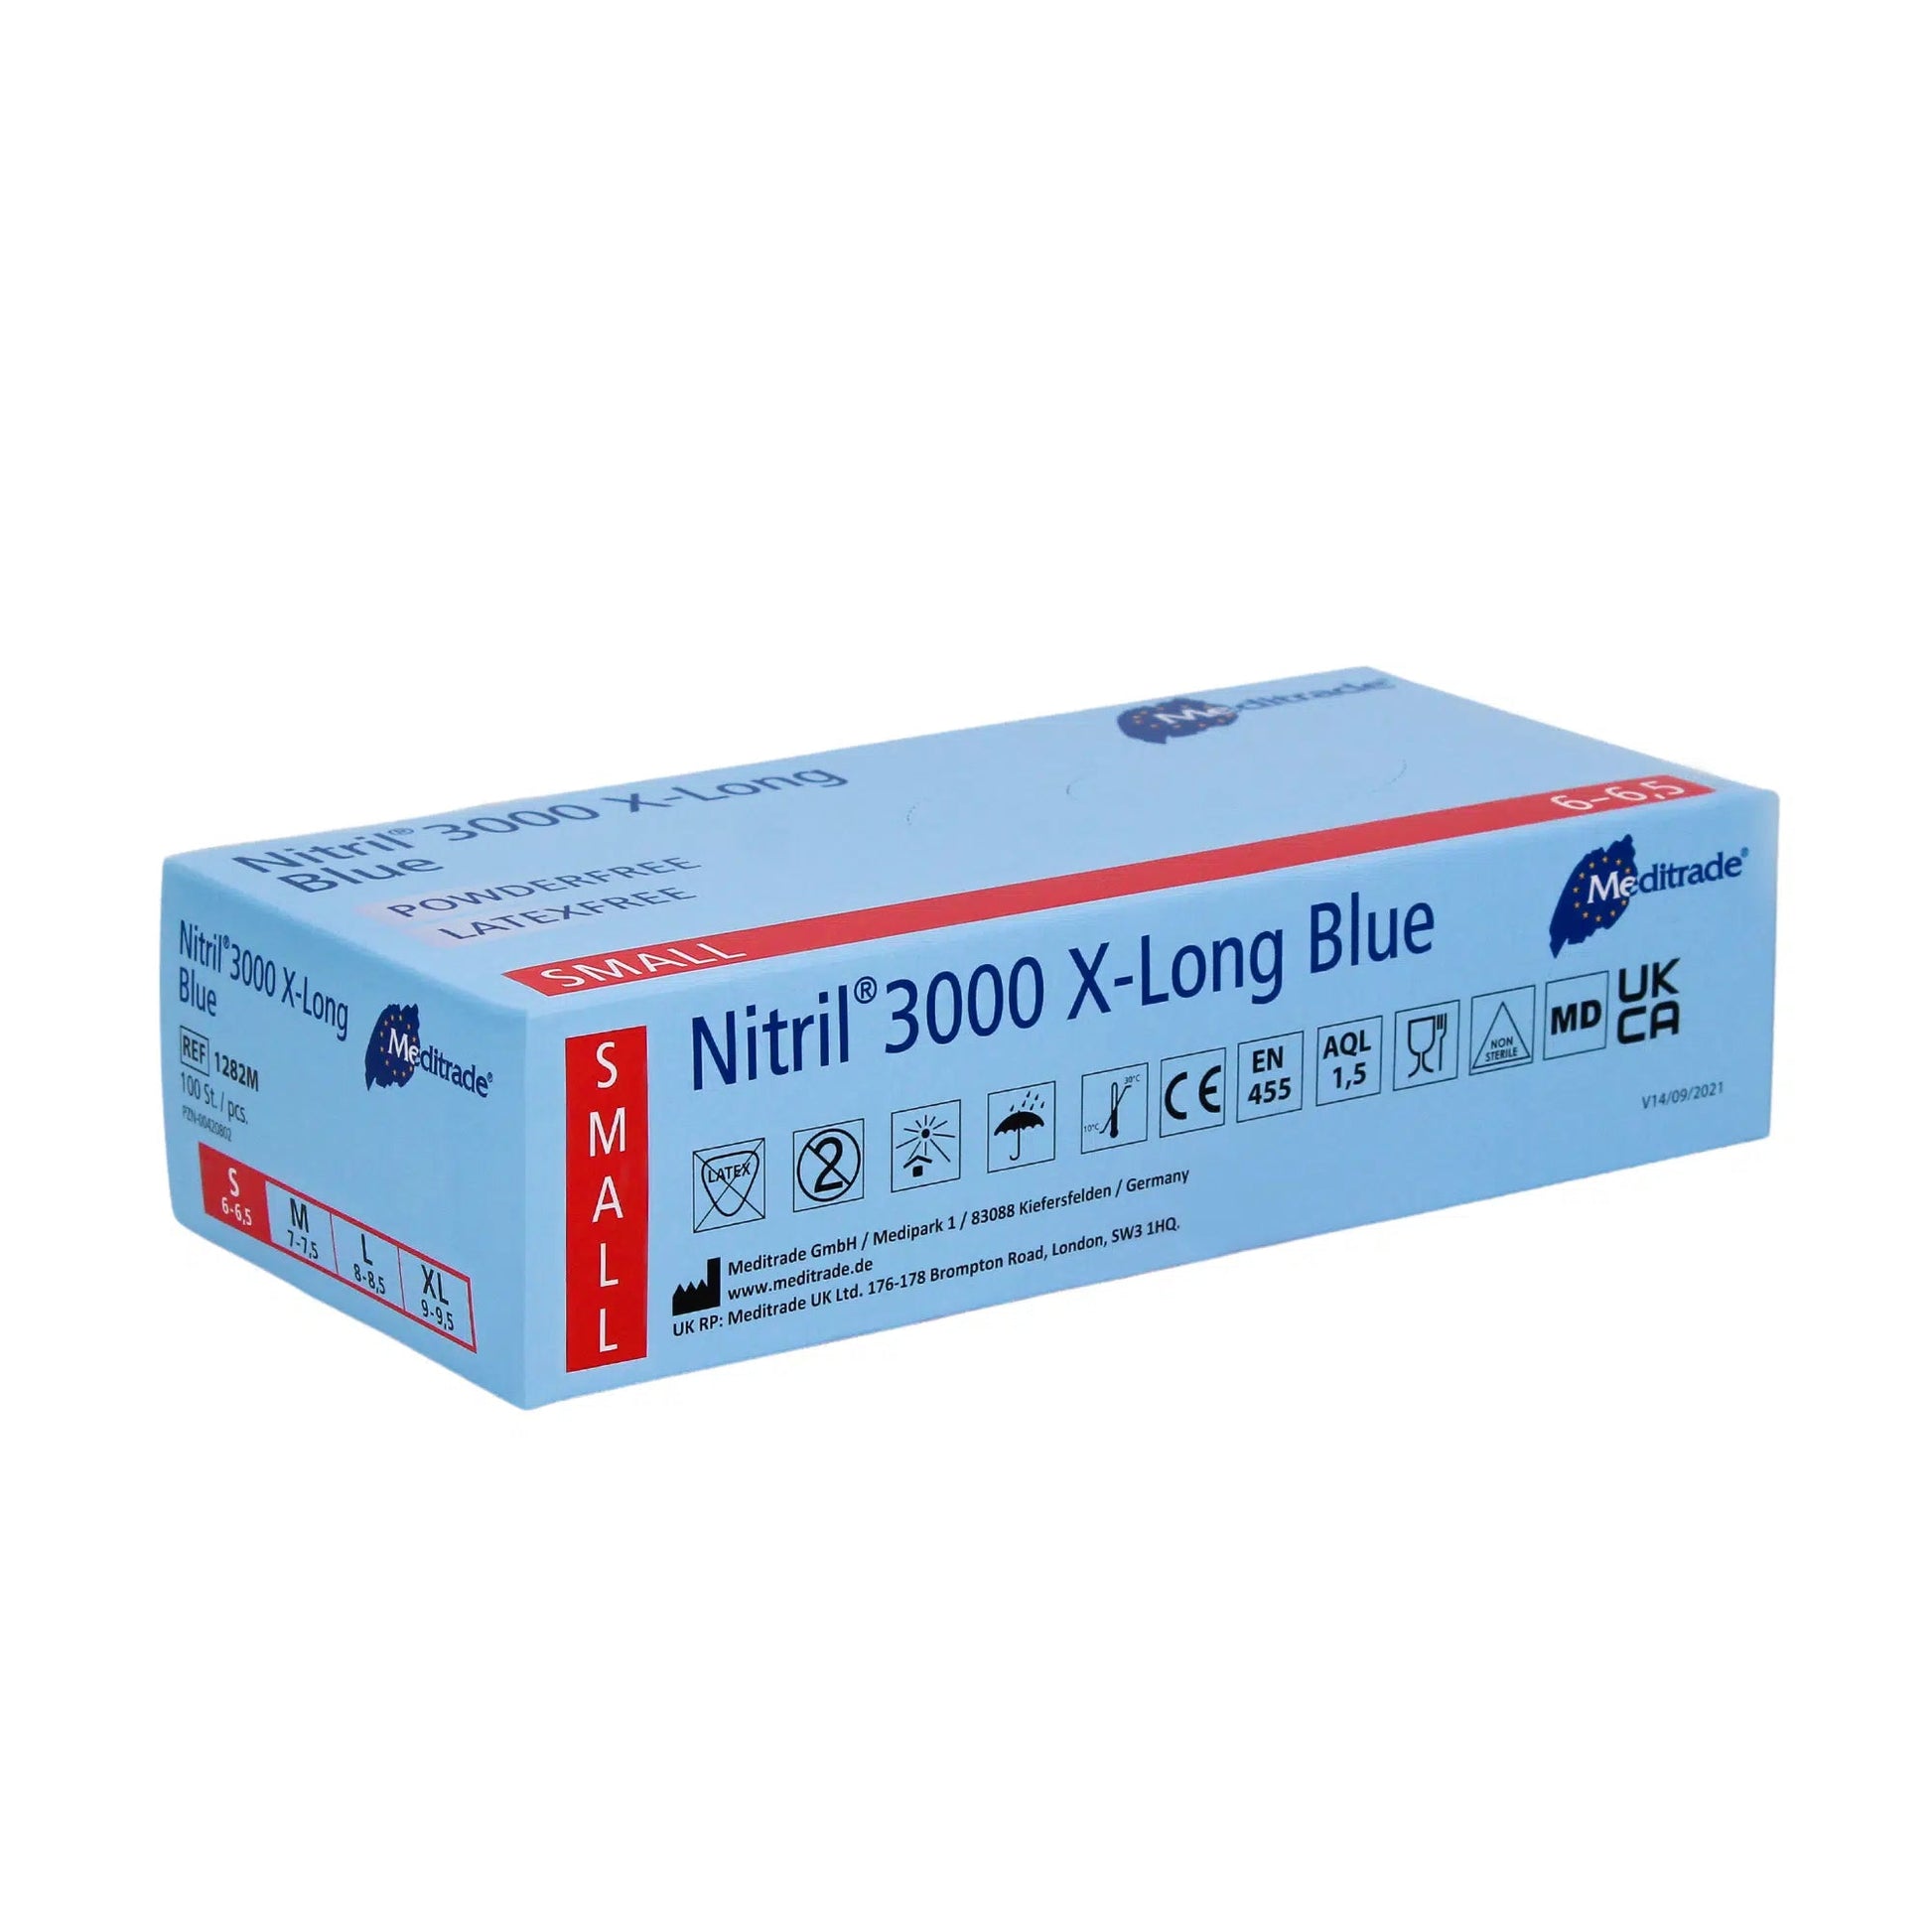 Meditrade Nitril® 3000 X-Long 100 pieces. Nitrile gloves extra long, blue